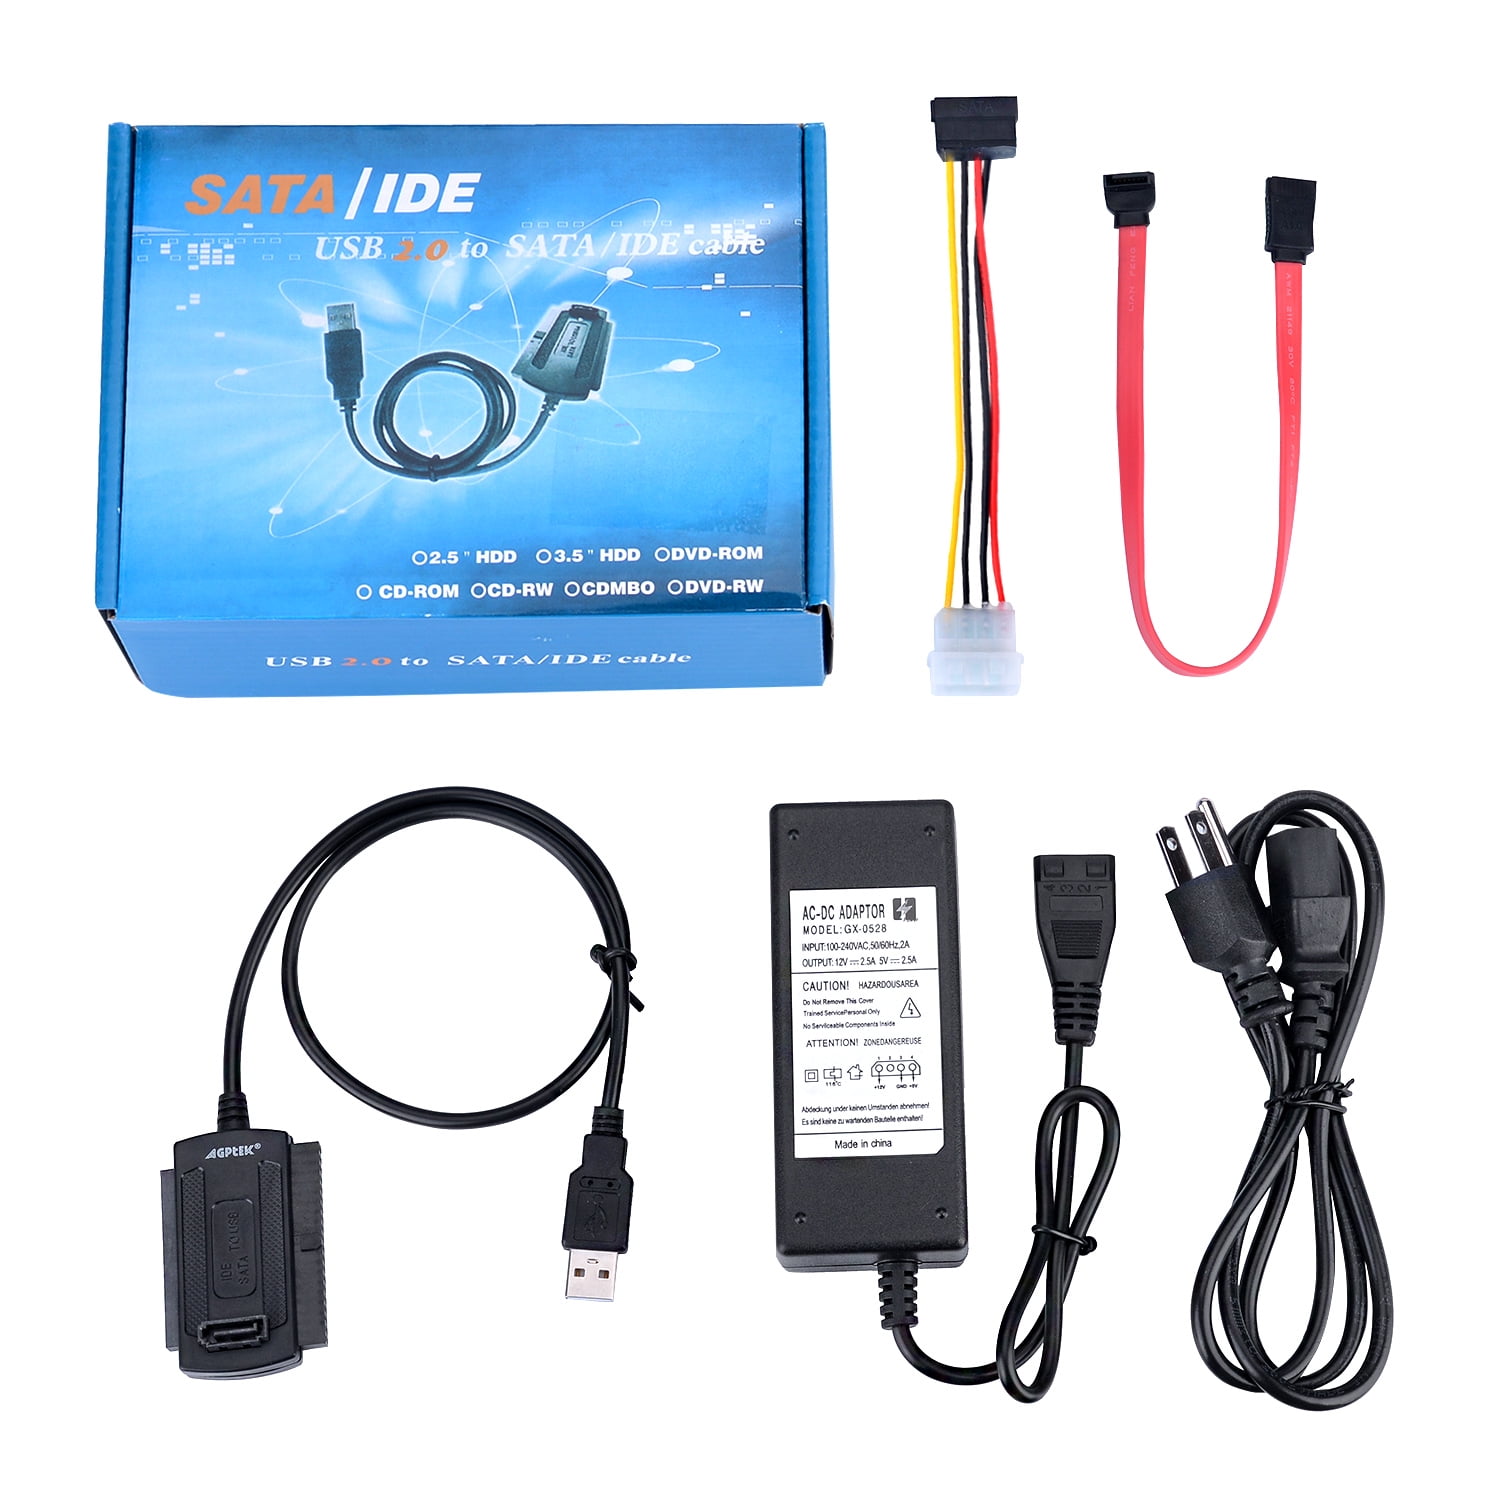 Kingwin USI-2535 USB 2.0 to SATA and IDE Adapter for 2.5 Inch and 3.5 Inch HDD 